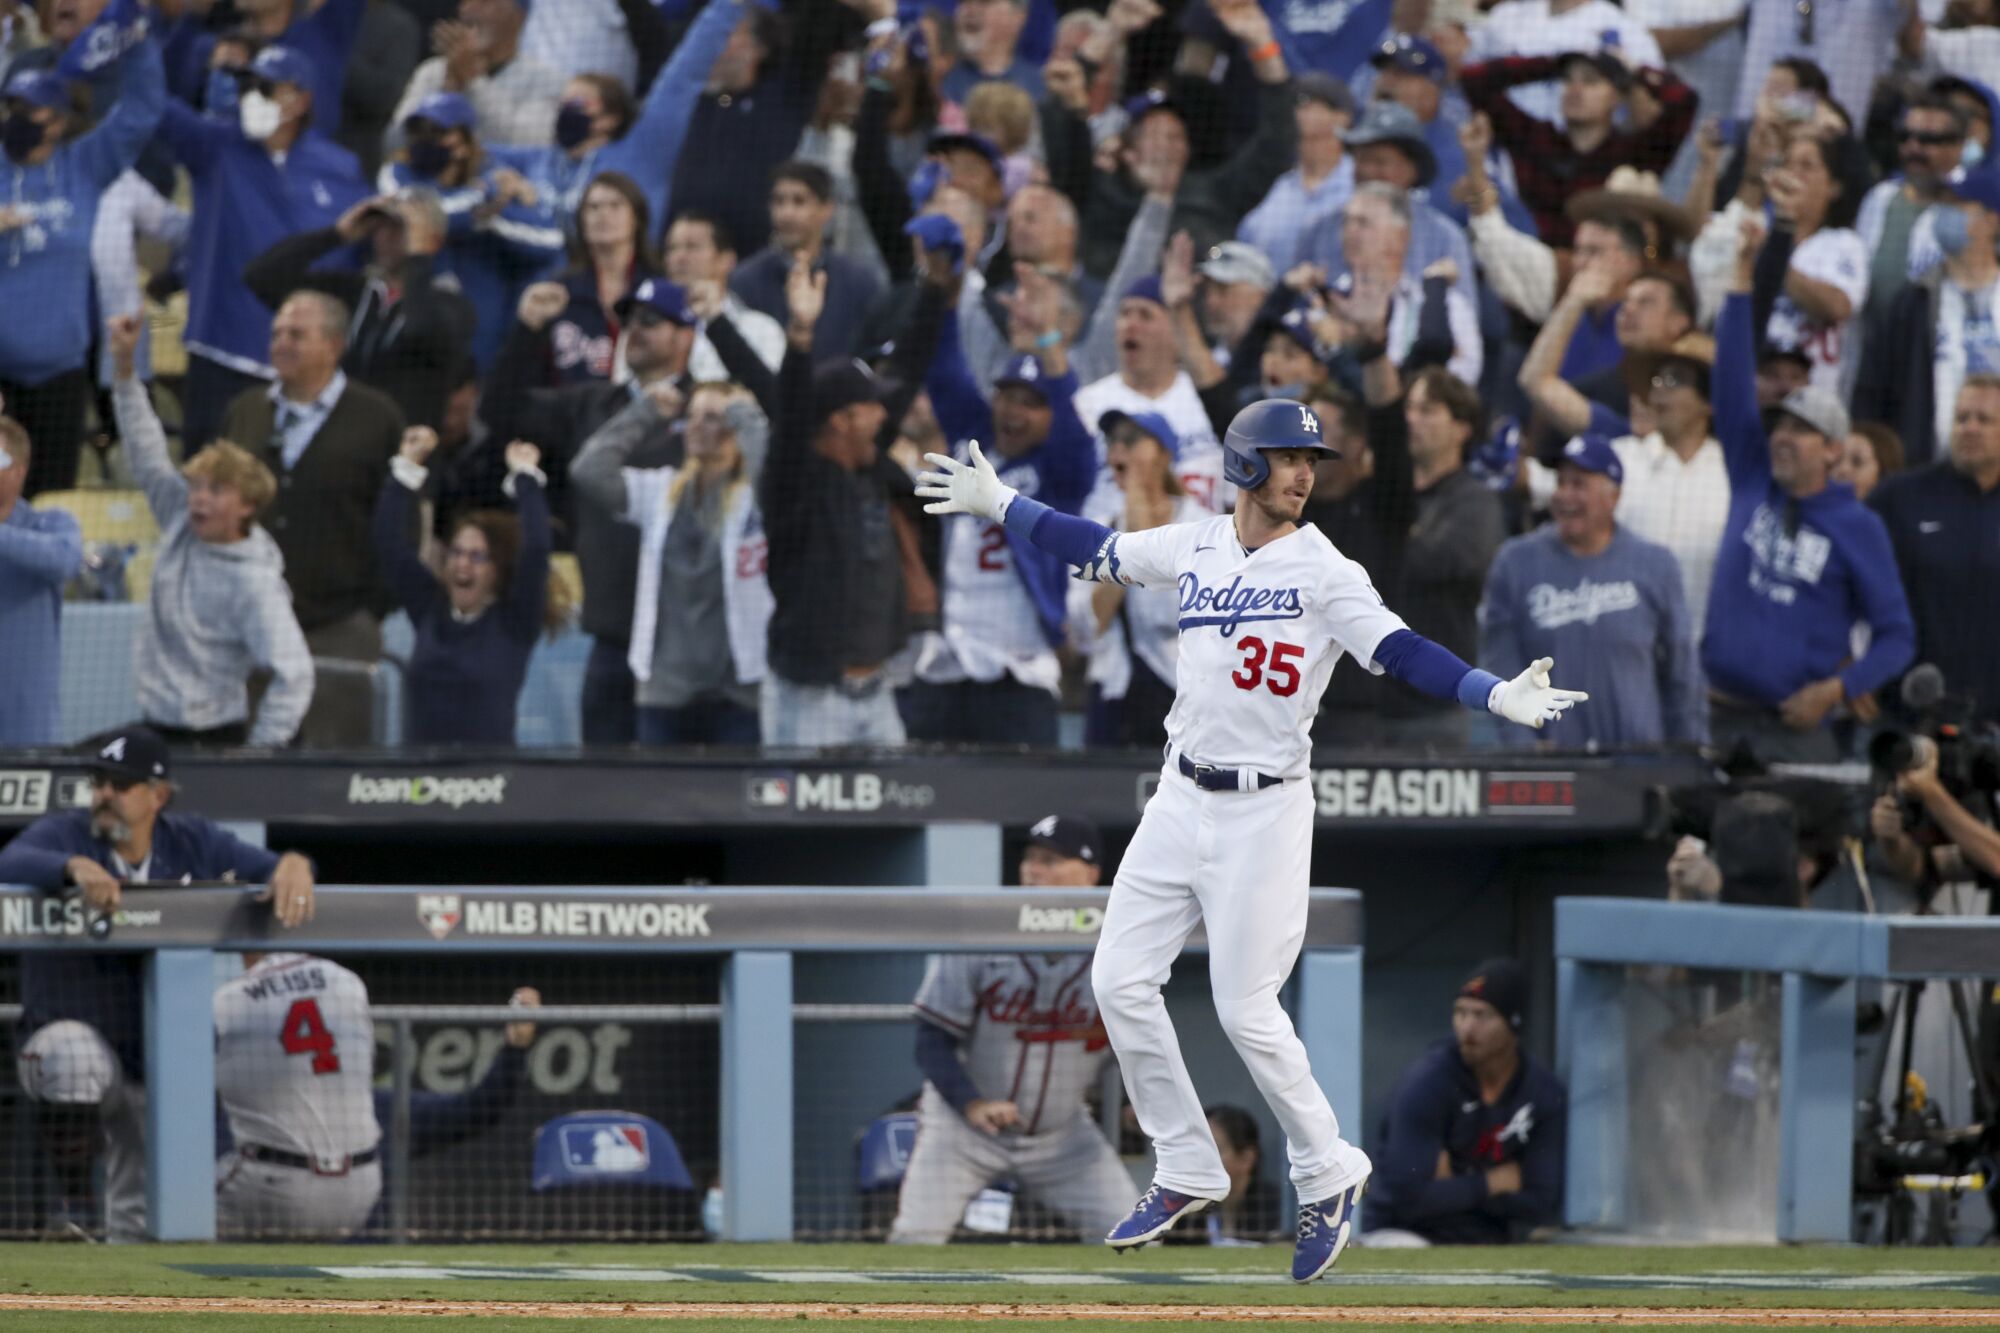 Los Angeles Dodgers' Cody Bellinger celebrates after hitting the game-tying three-run home run.